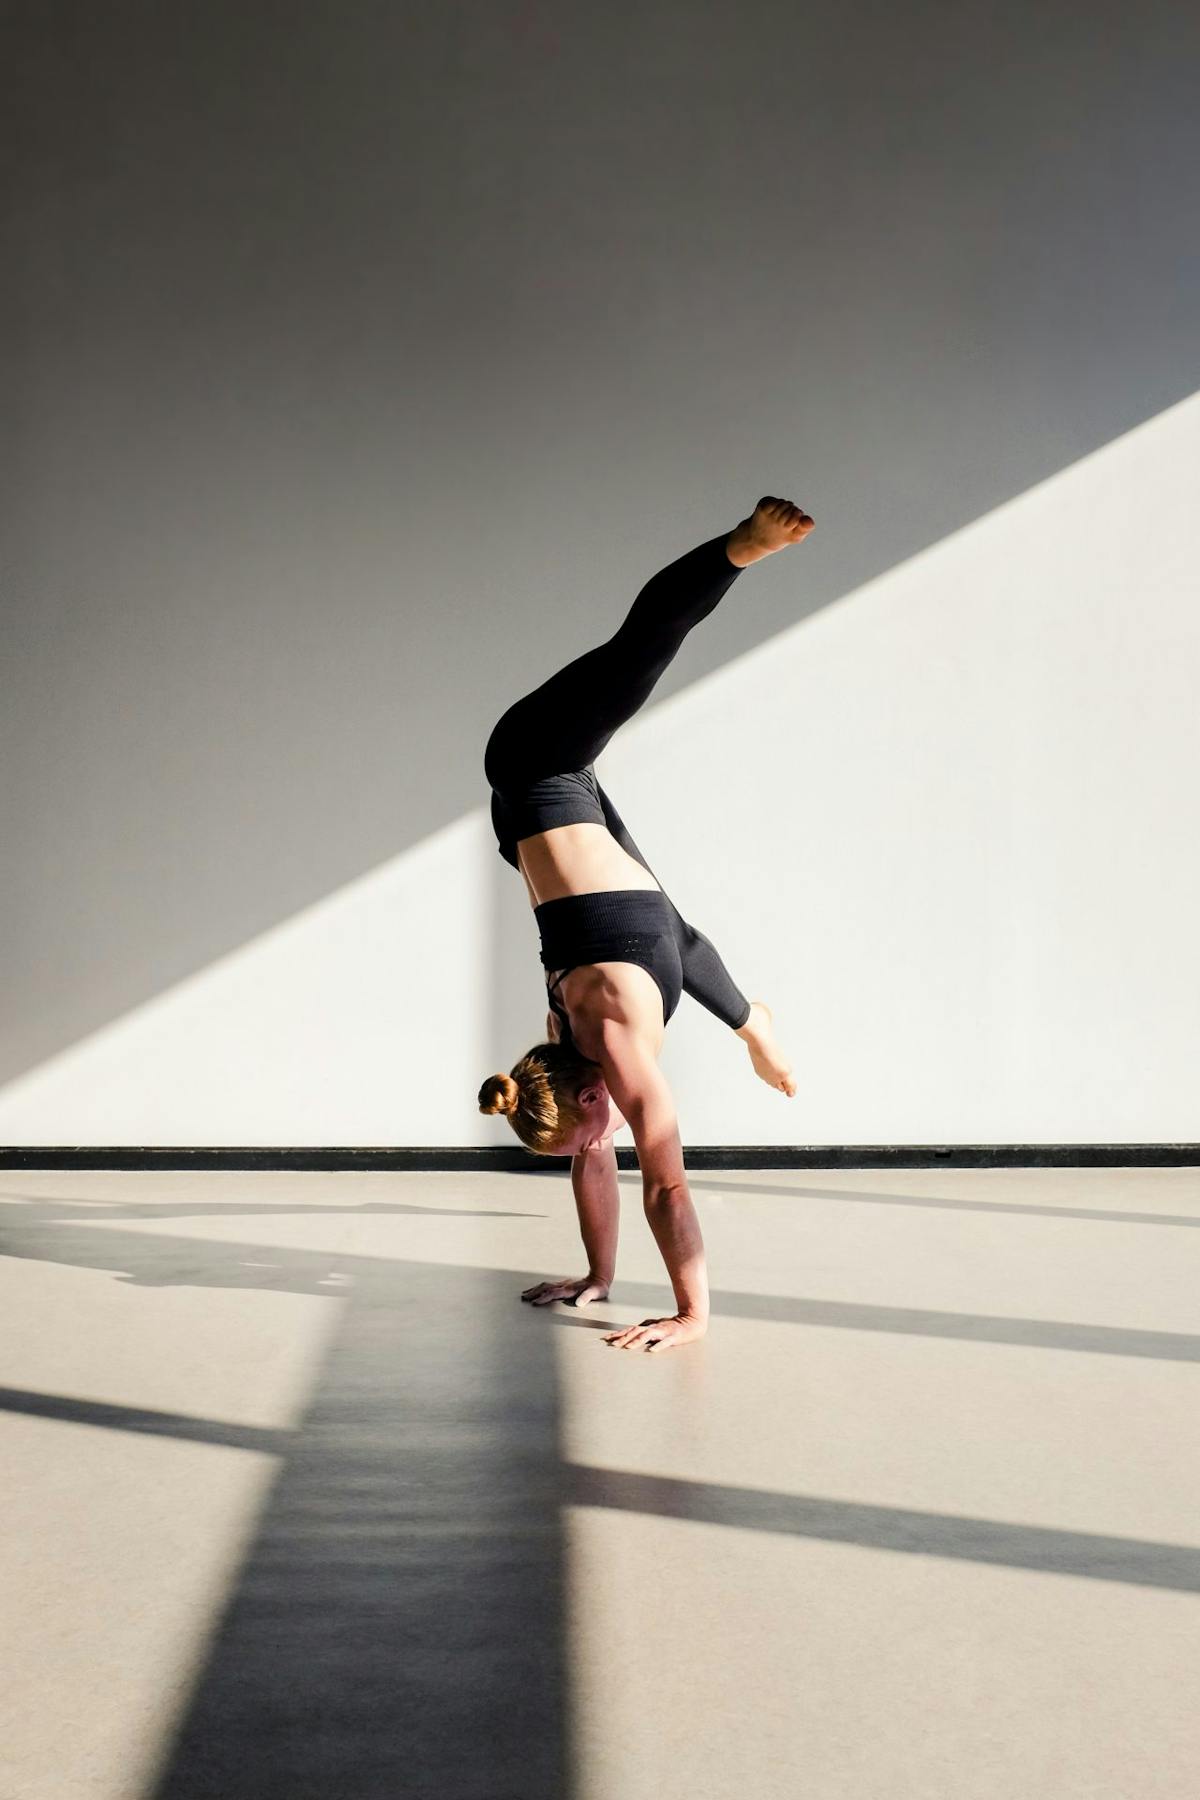 Improve flexibility: How to be more flexible